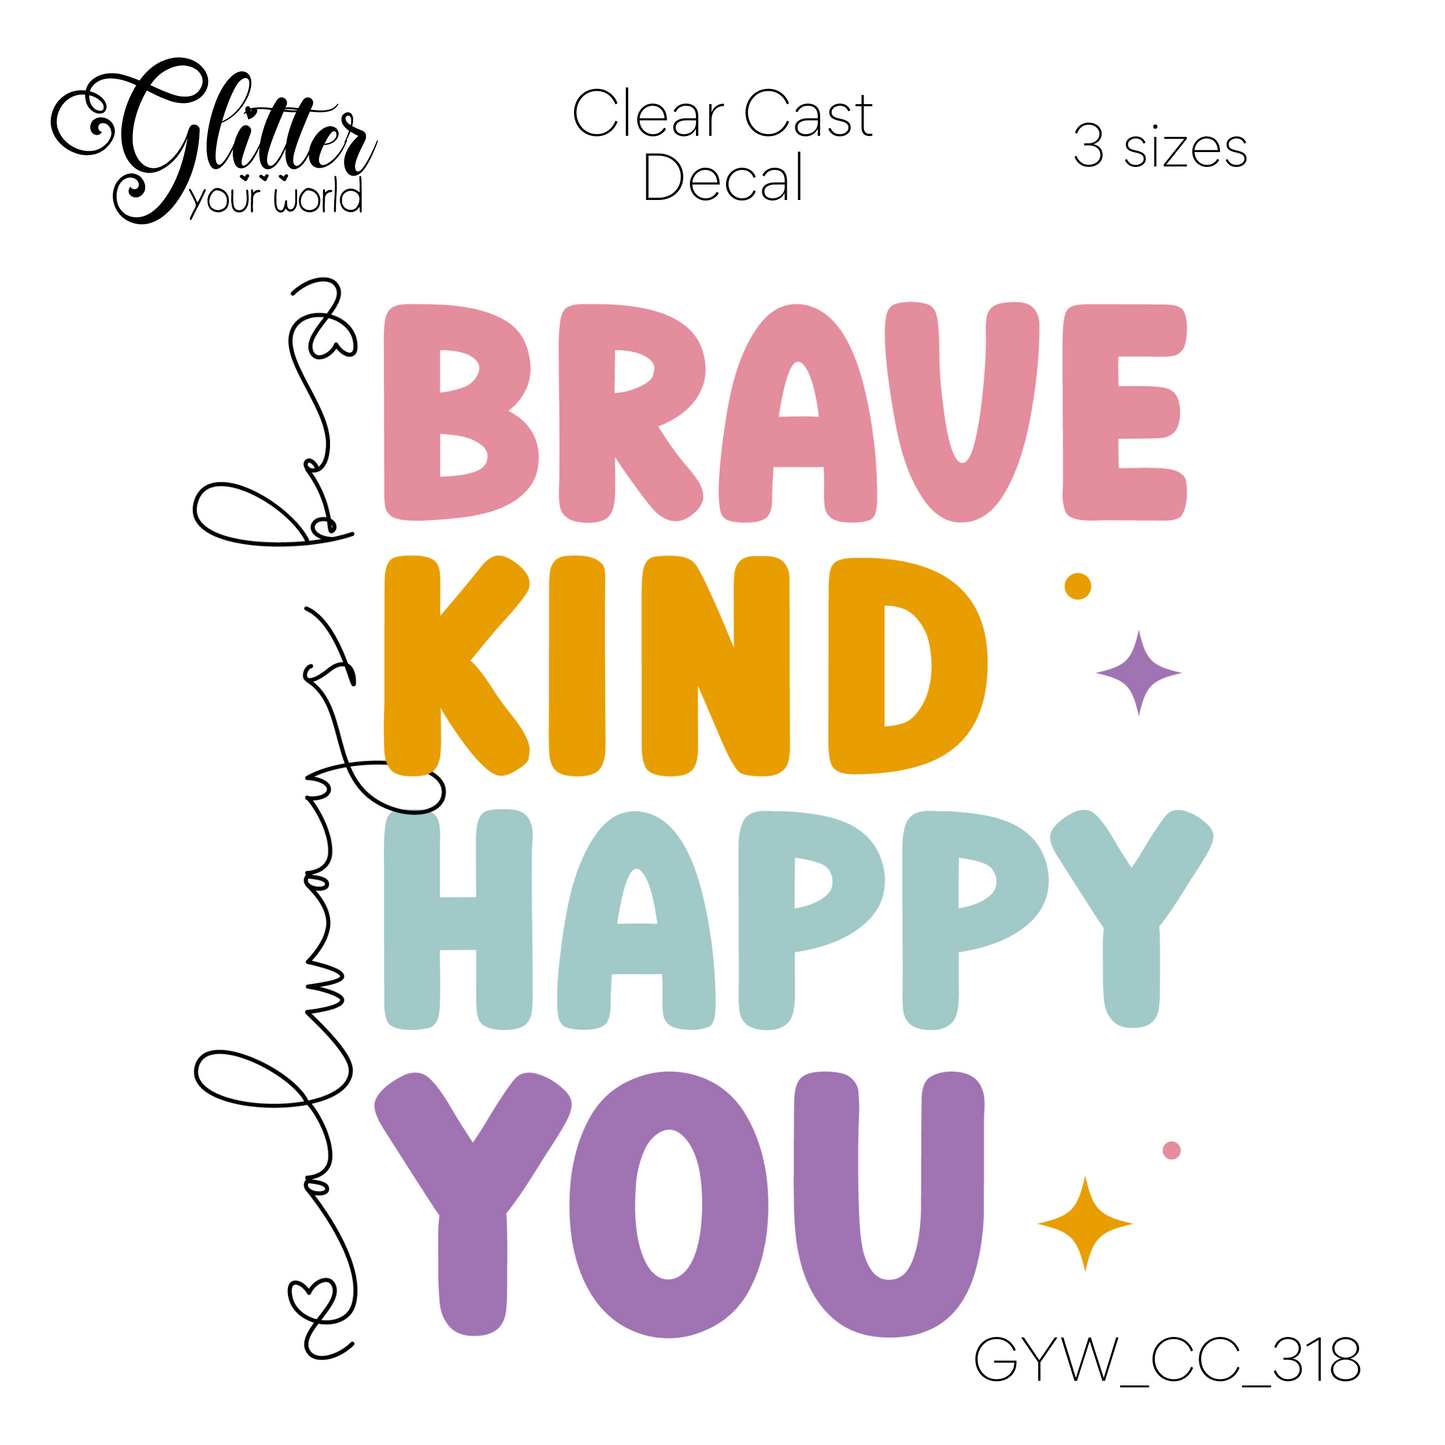 Brave Kind Happy You CC_318 Clear Cast Decal